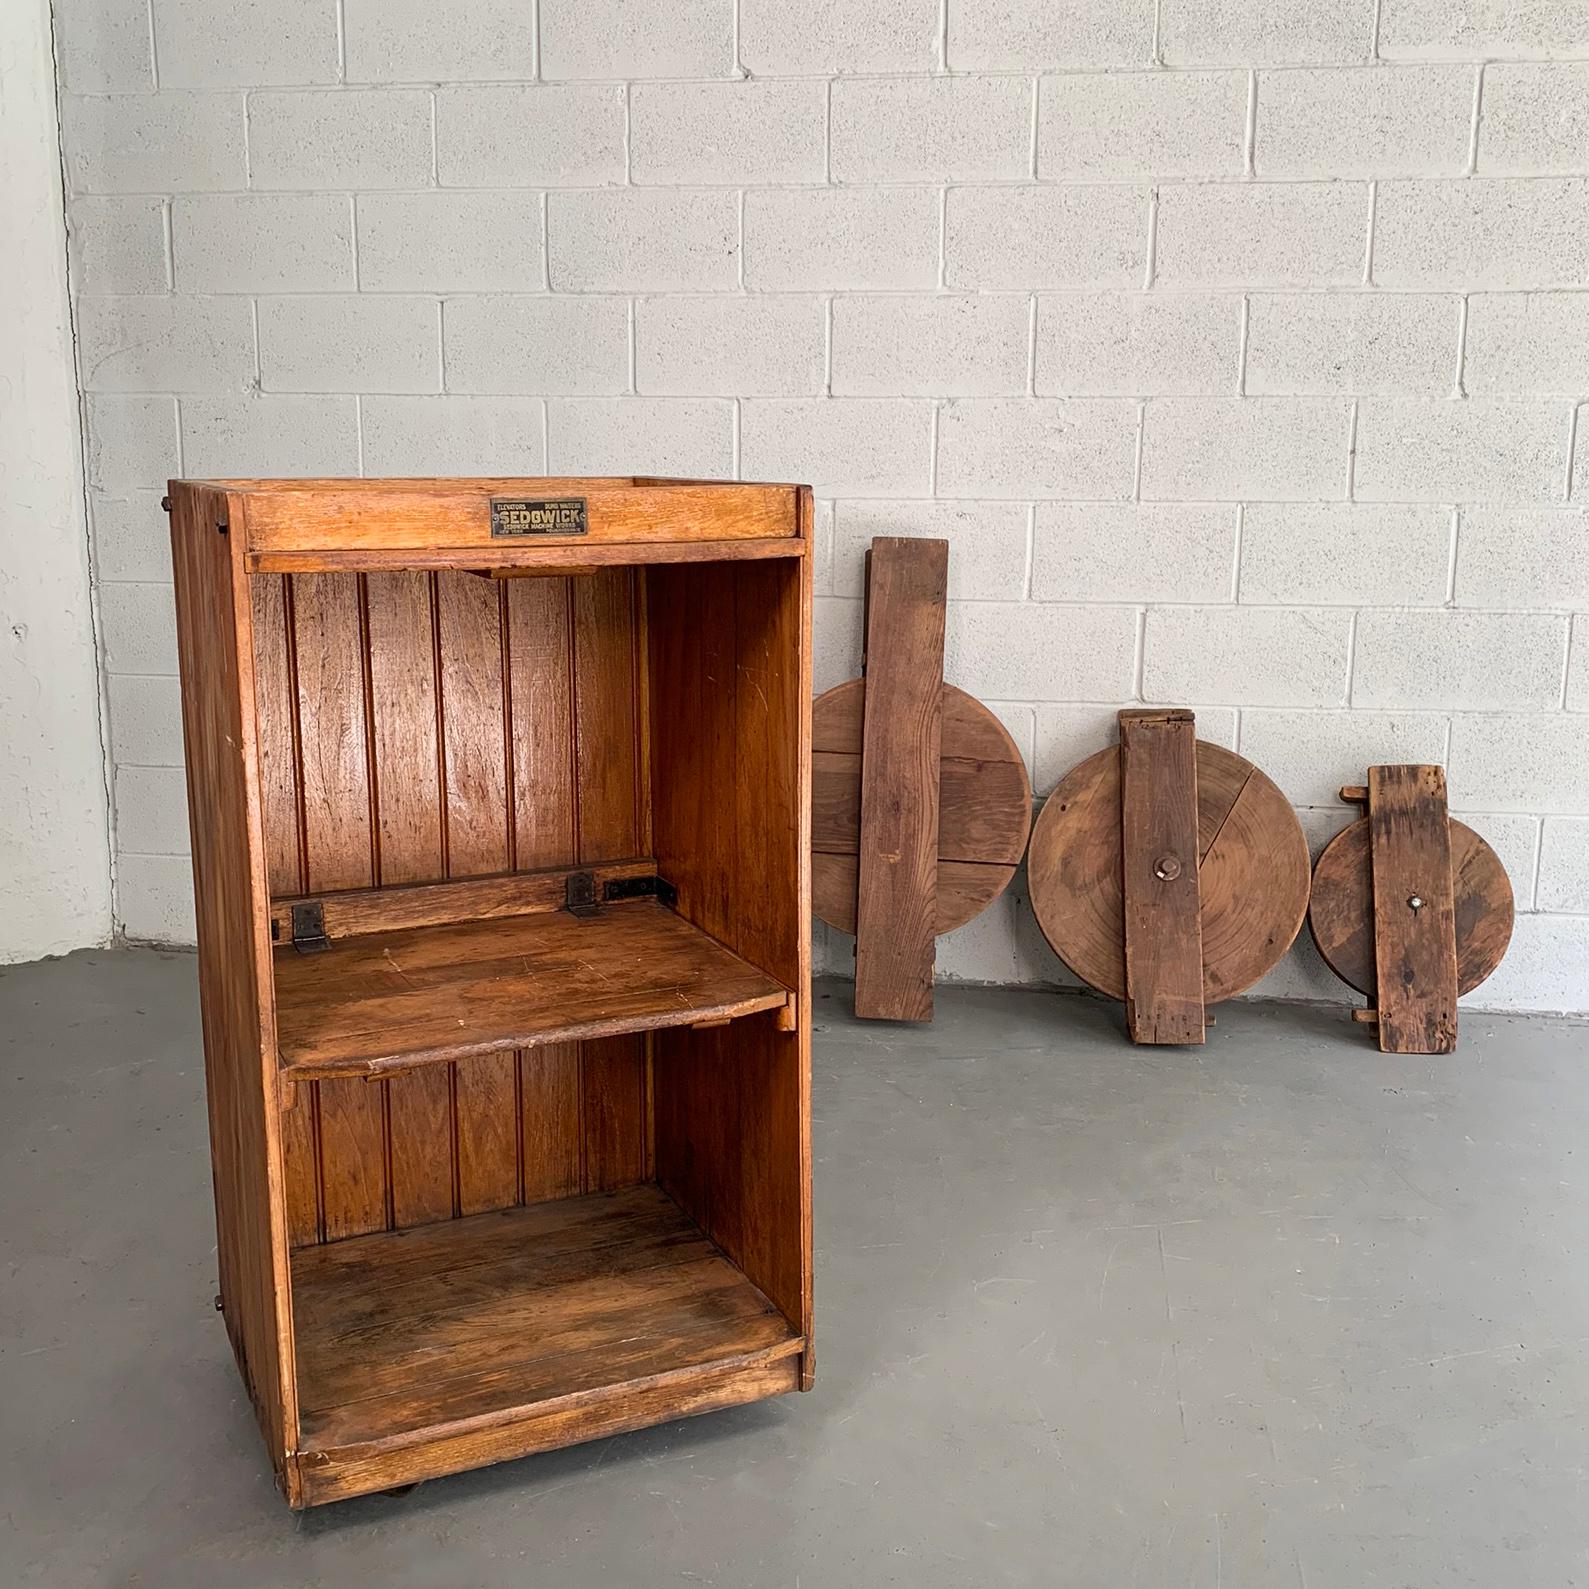 Industrial, early 20th century, douglas fir, dumbwaiter cabinet by Sedgewick is a flexible cabinet case for books or display that rolls on casters. The top section is 18.75 inches height and the bottom section is 15.5 inches height. The dumbwaiter